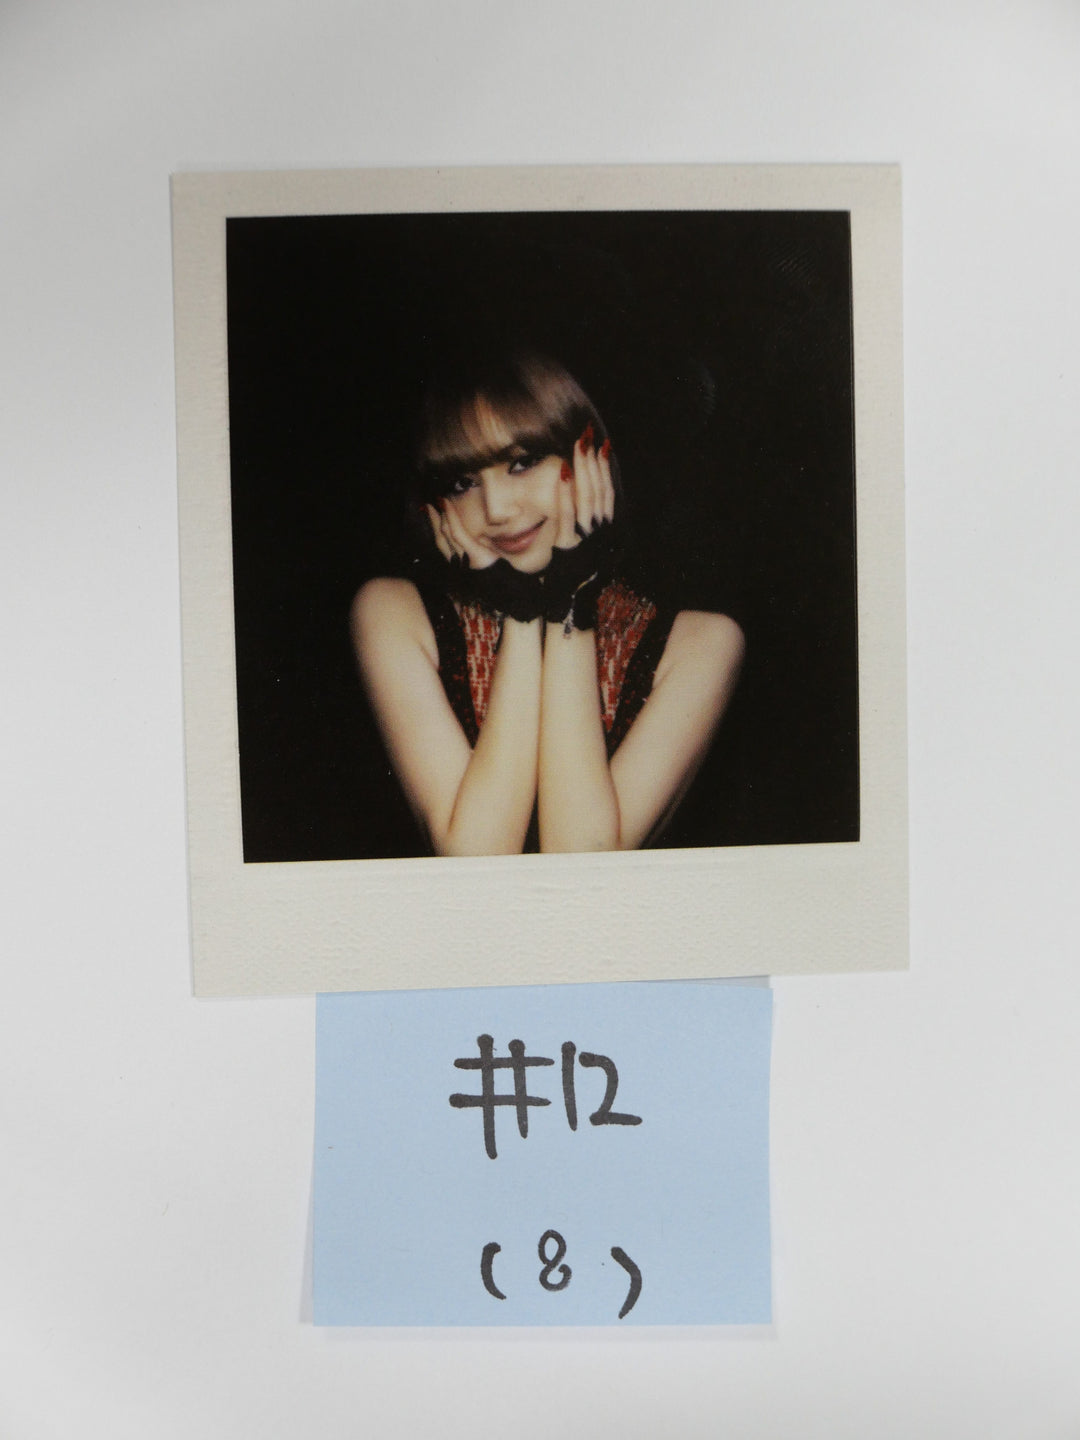 Lisa (of Blackpink) "LALISA" 1st Single - Official Photocard [Updated 11/1]